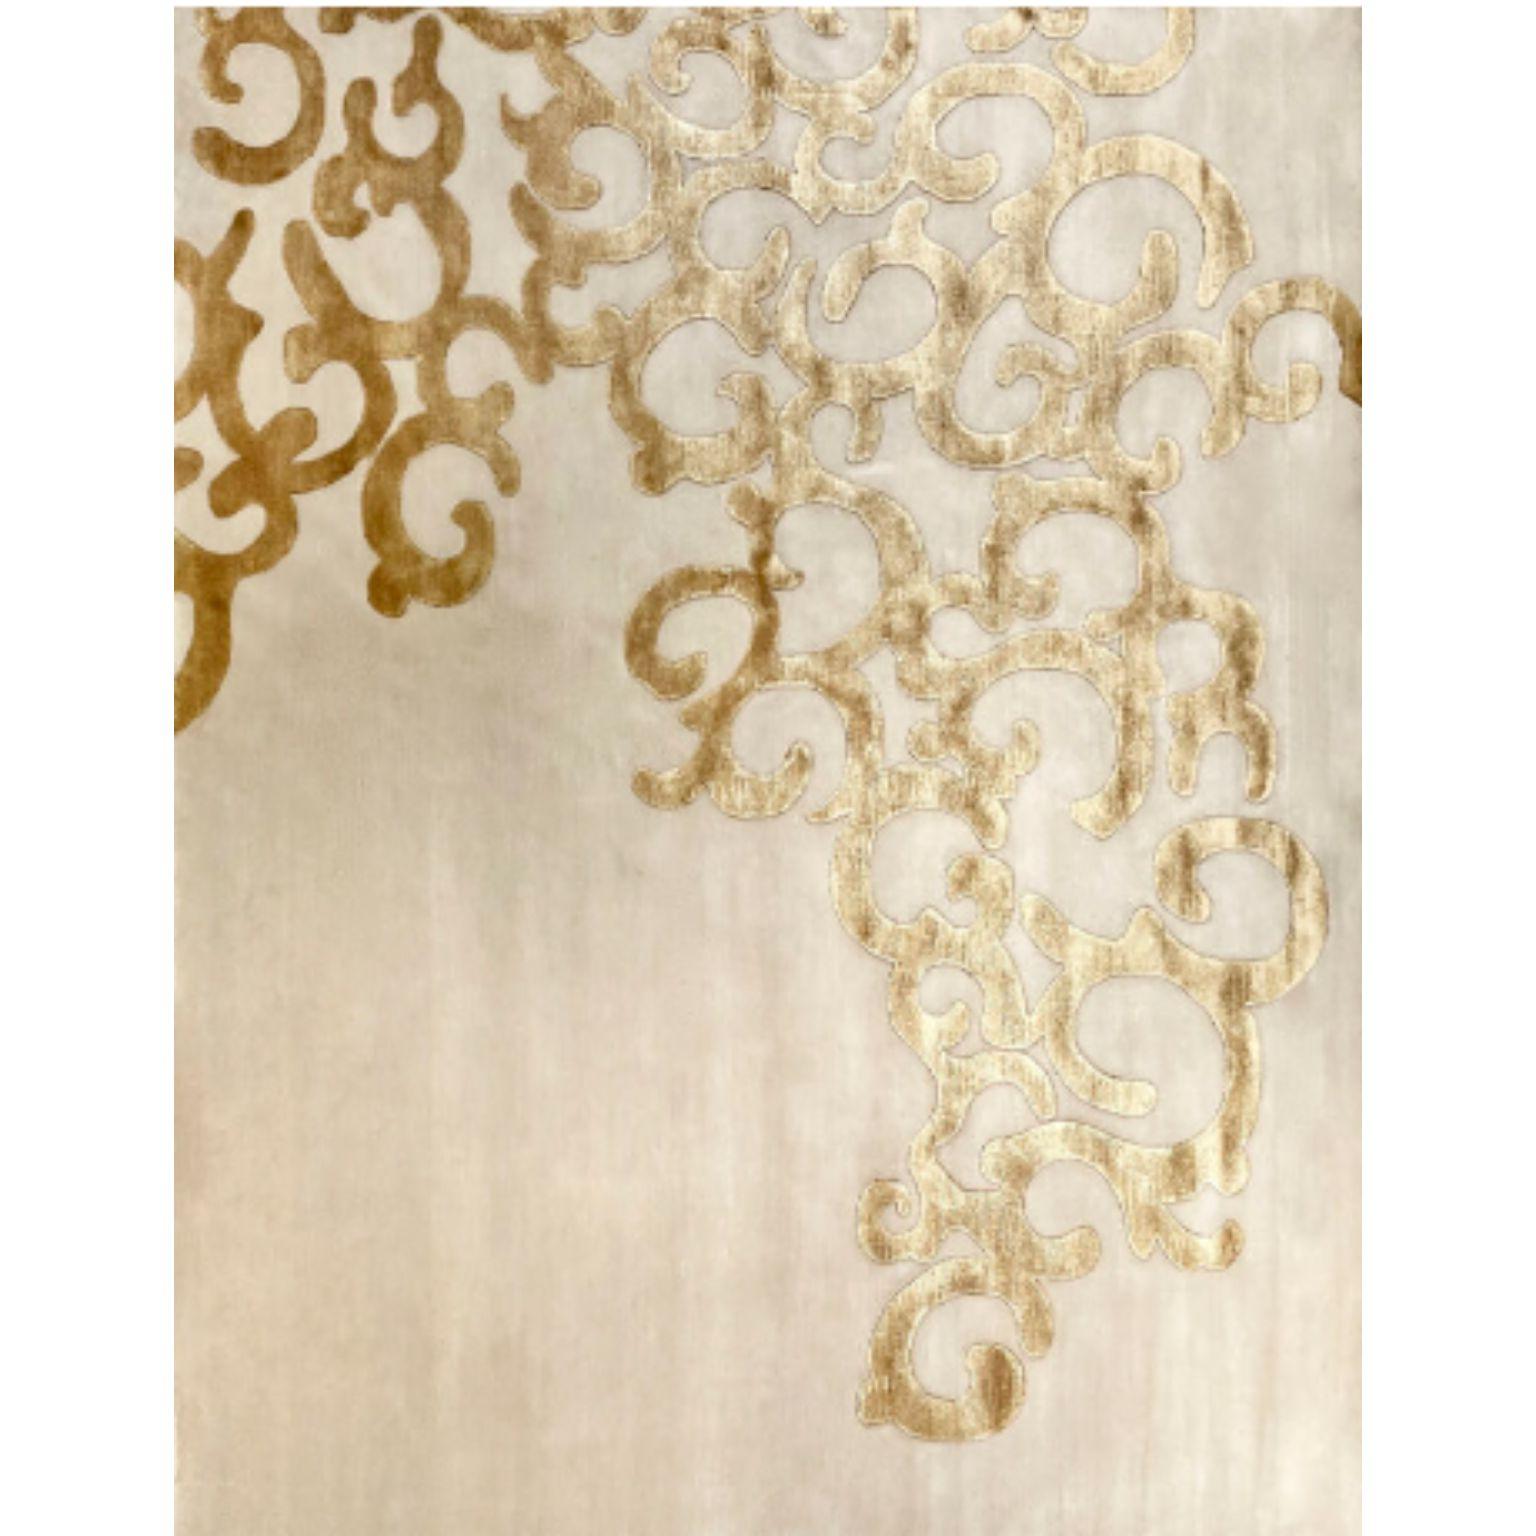 MEMENTO 200 rug by Illulian
Dimensions: D300 x H200 cm 
Materials: Wool 50% , Silk 50%
Variations available and prices may vary according to materials and sizes. 

Illulian, historic and prestigious rug company brand, internationally renowned